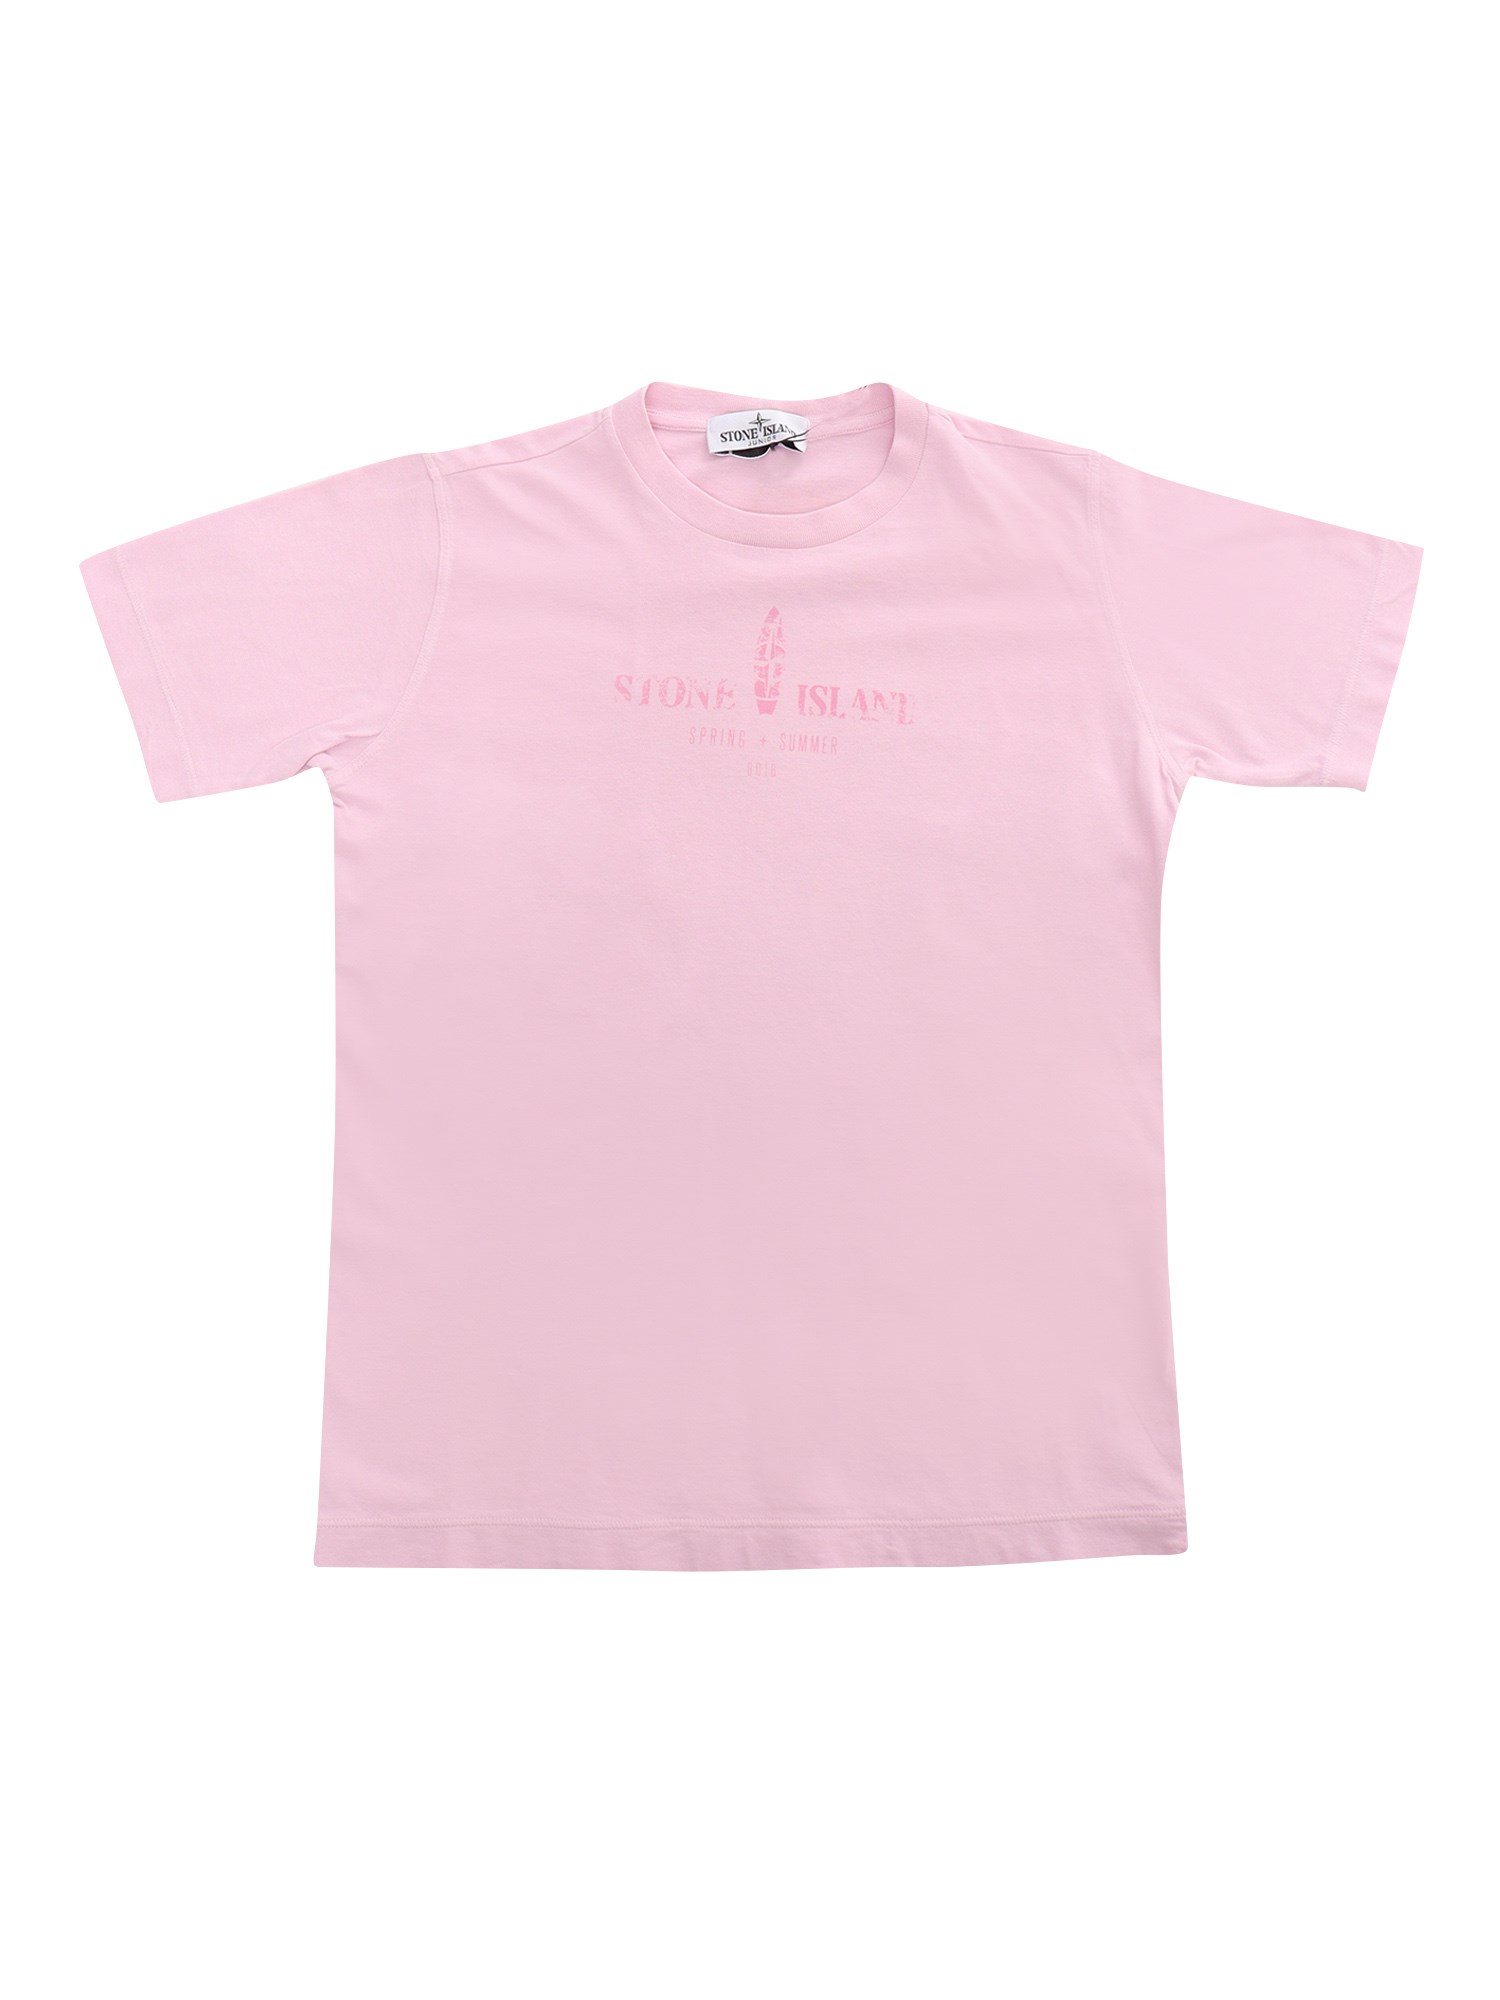 Stone Island Pink T-shirt With Prints